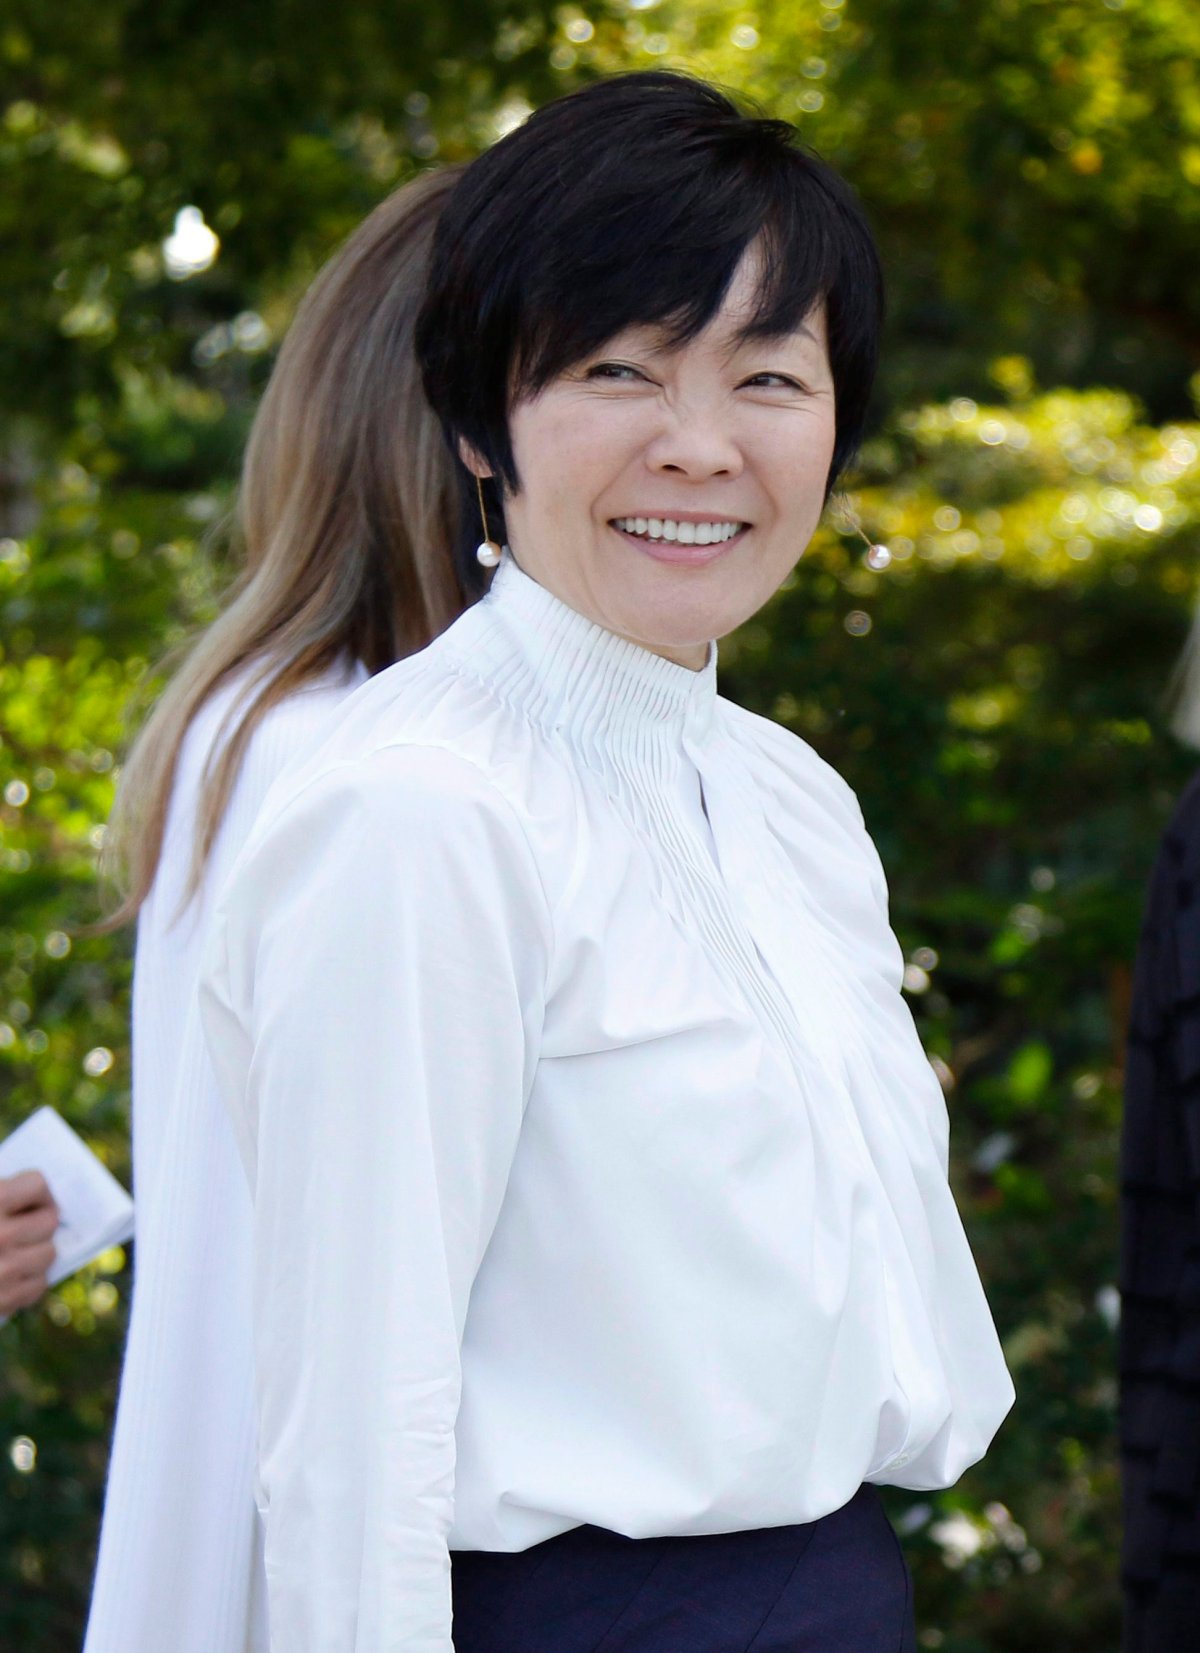 Akie Abe, wife of Japanese Prime Minister Shinzo Abe, smiles as she walks by the media during a tour of Morikami Museum and Japanese Gardens in Delray Beach, Fla., on Saturday, Feb. 11, 2017. 